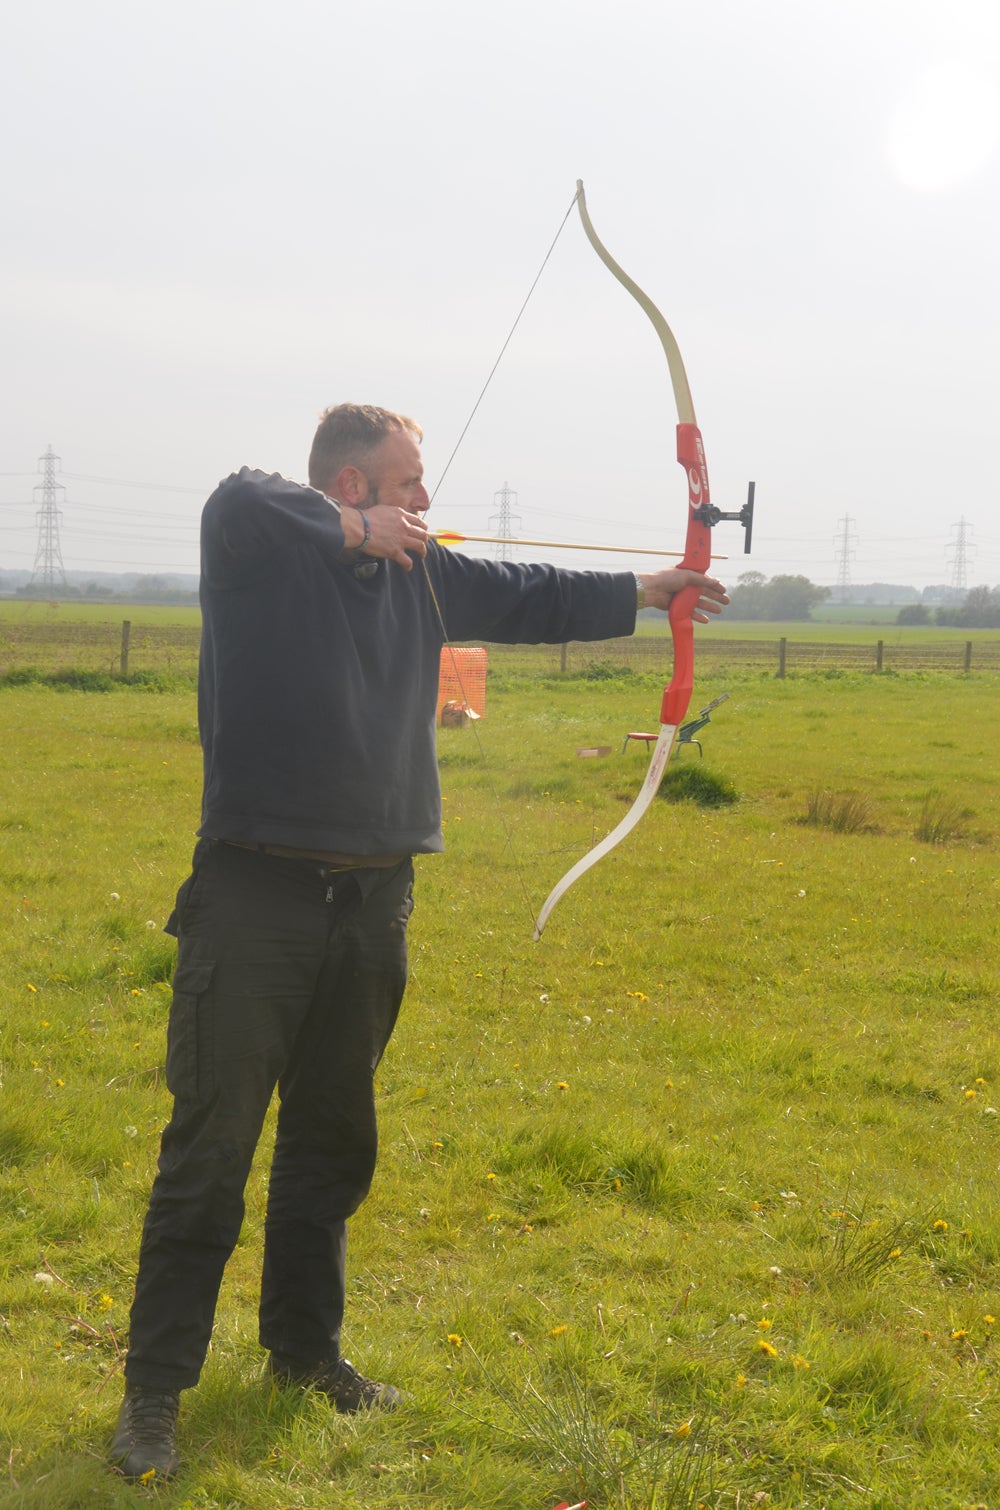 Ian is a competent archer (Collect/PA Real Life)